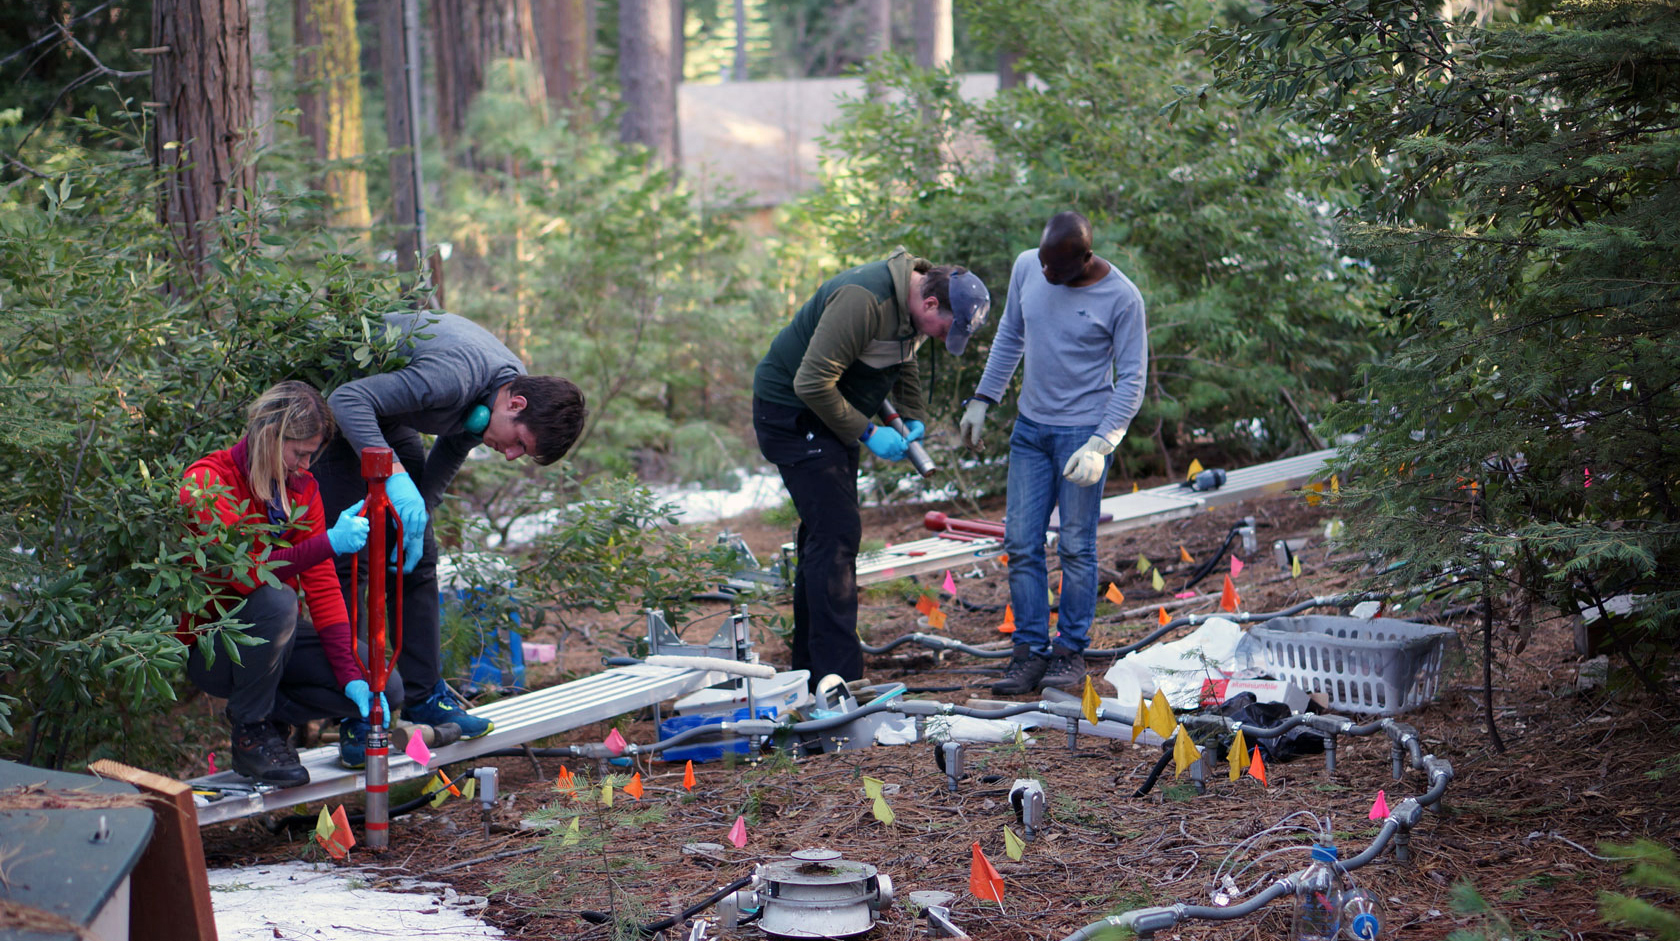 Researchers from the University of Zurich measure the soil's carbon content in the Sierra Nevada National Forest